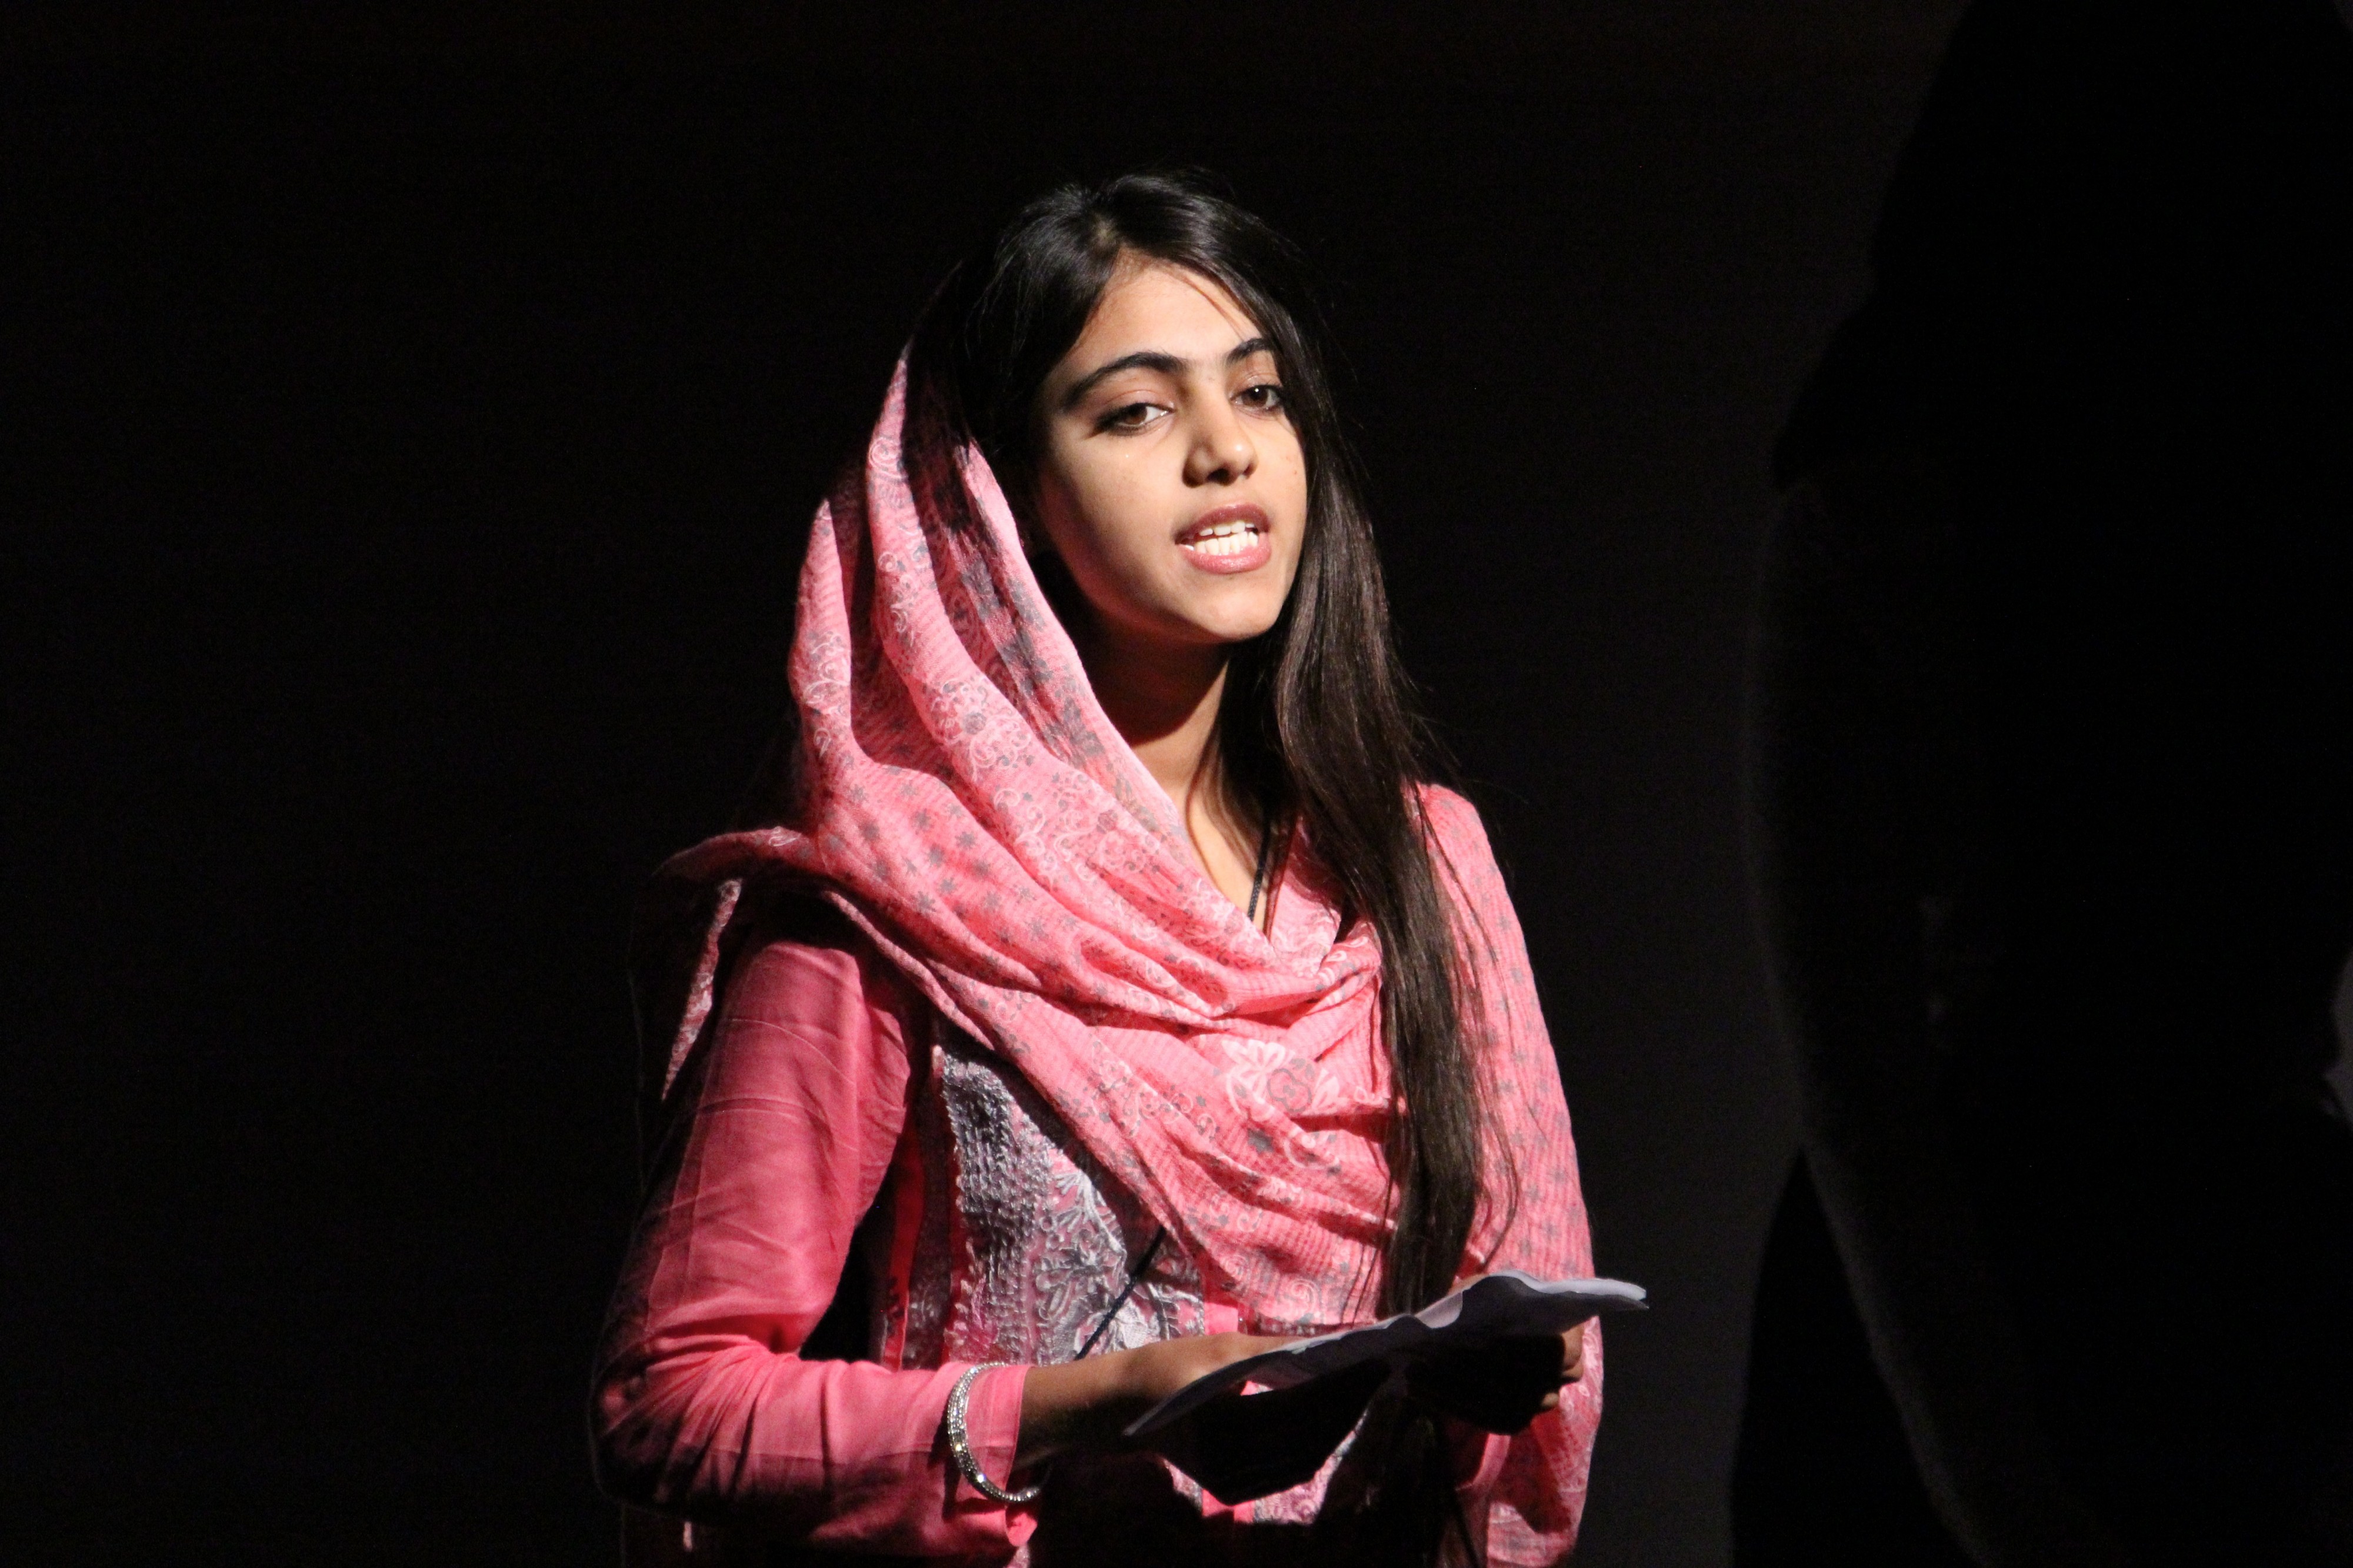 Laraib, 18, from Pakistan, takes part in a performance at the Girl Summit 2014 (14724587082)